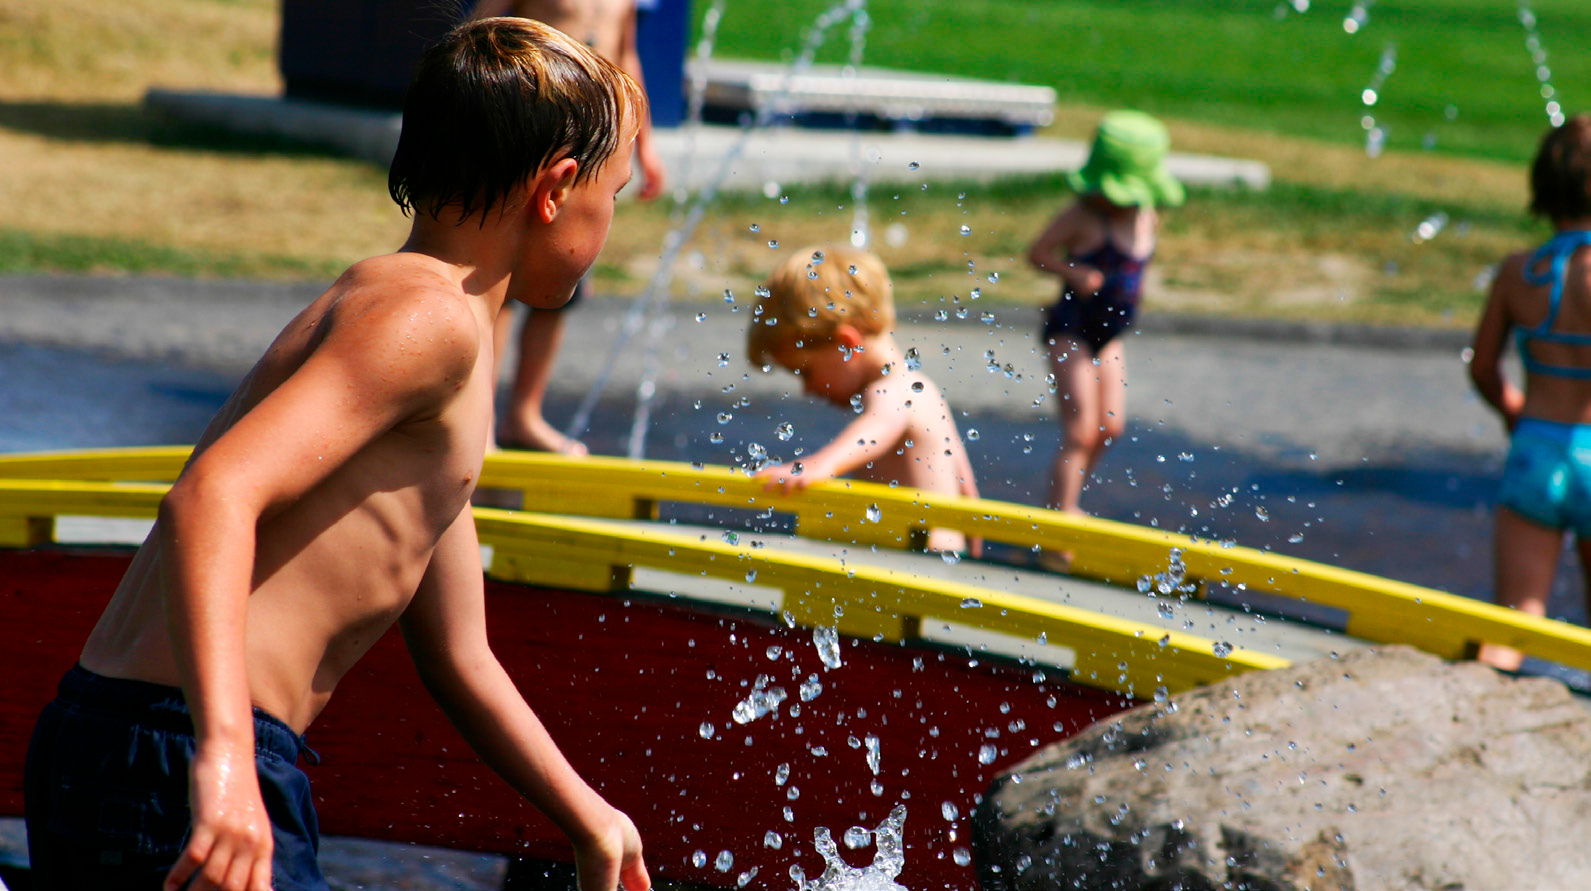 Children playing at outdoor water park